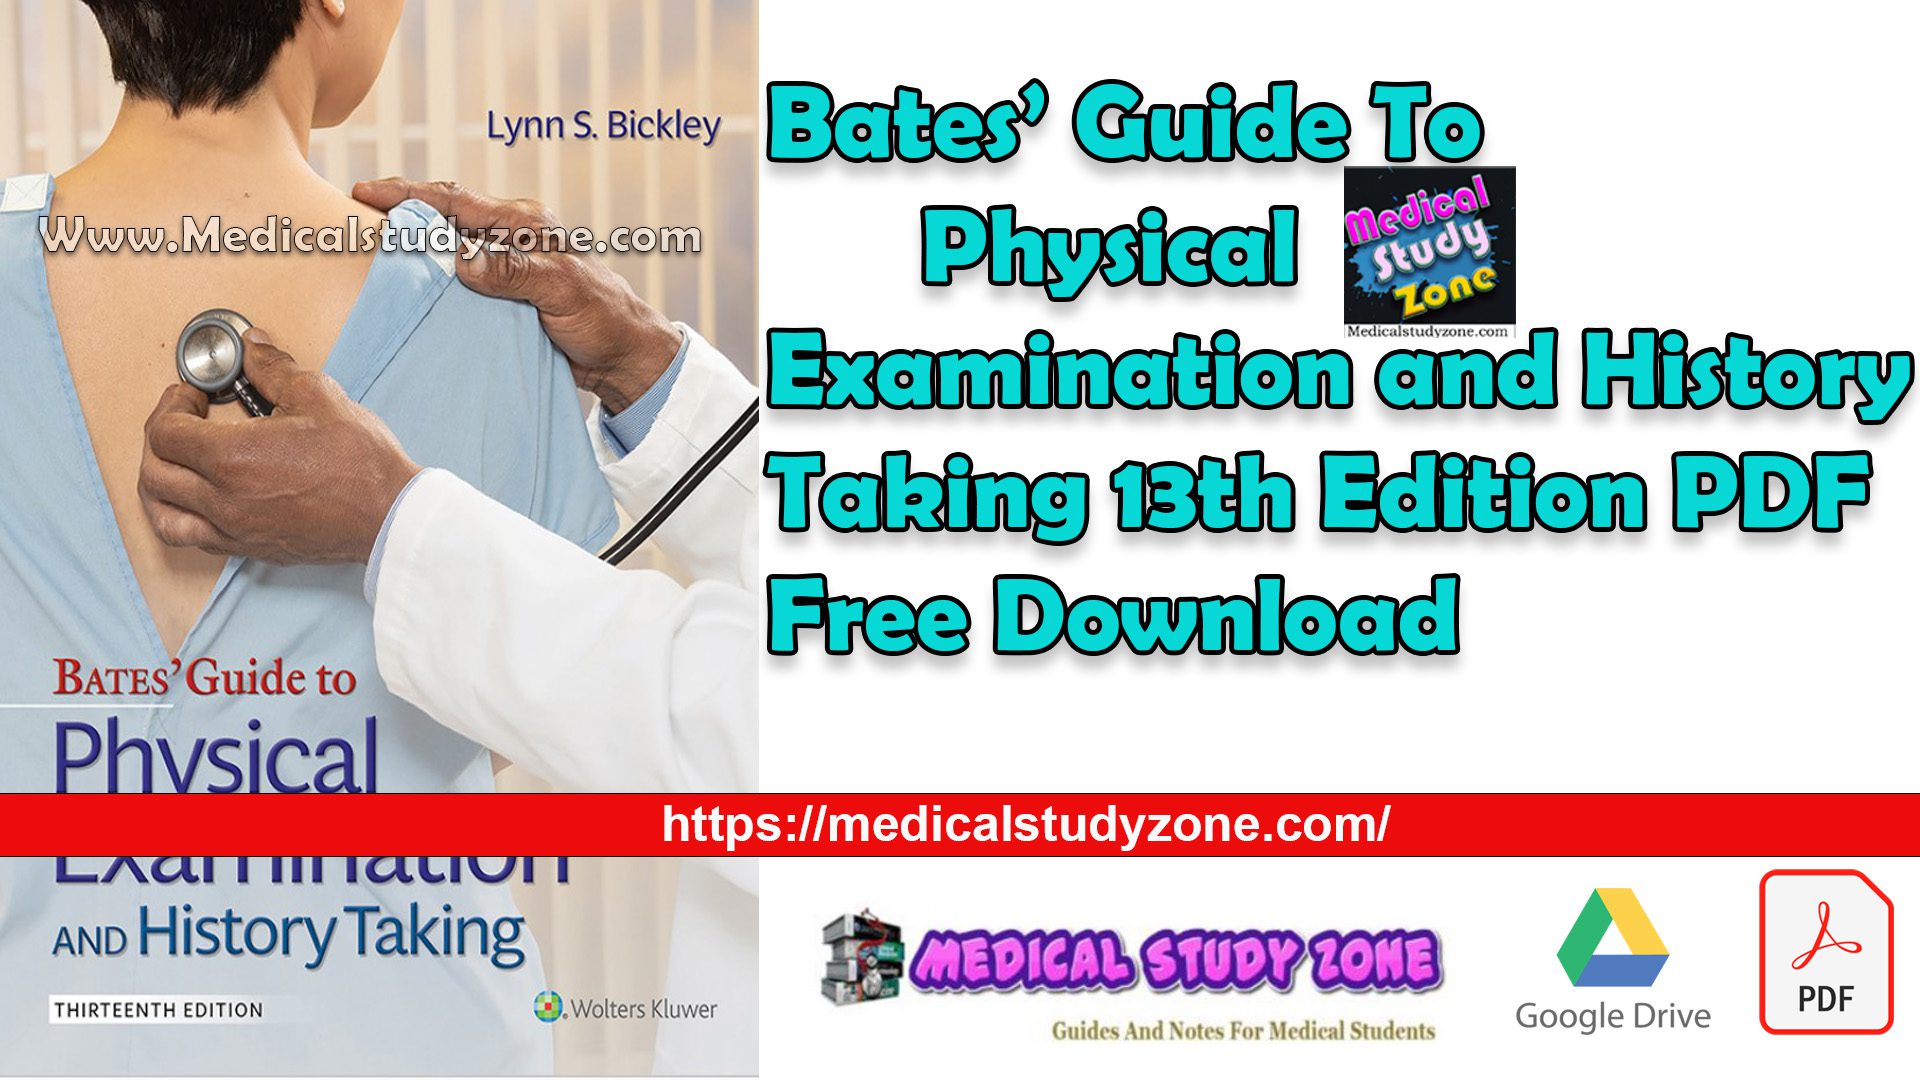 Bates’ Guide To Physical Examination and History Taking 13th Edition PDF Free Download